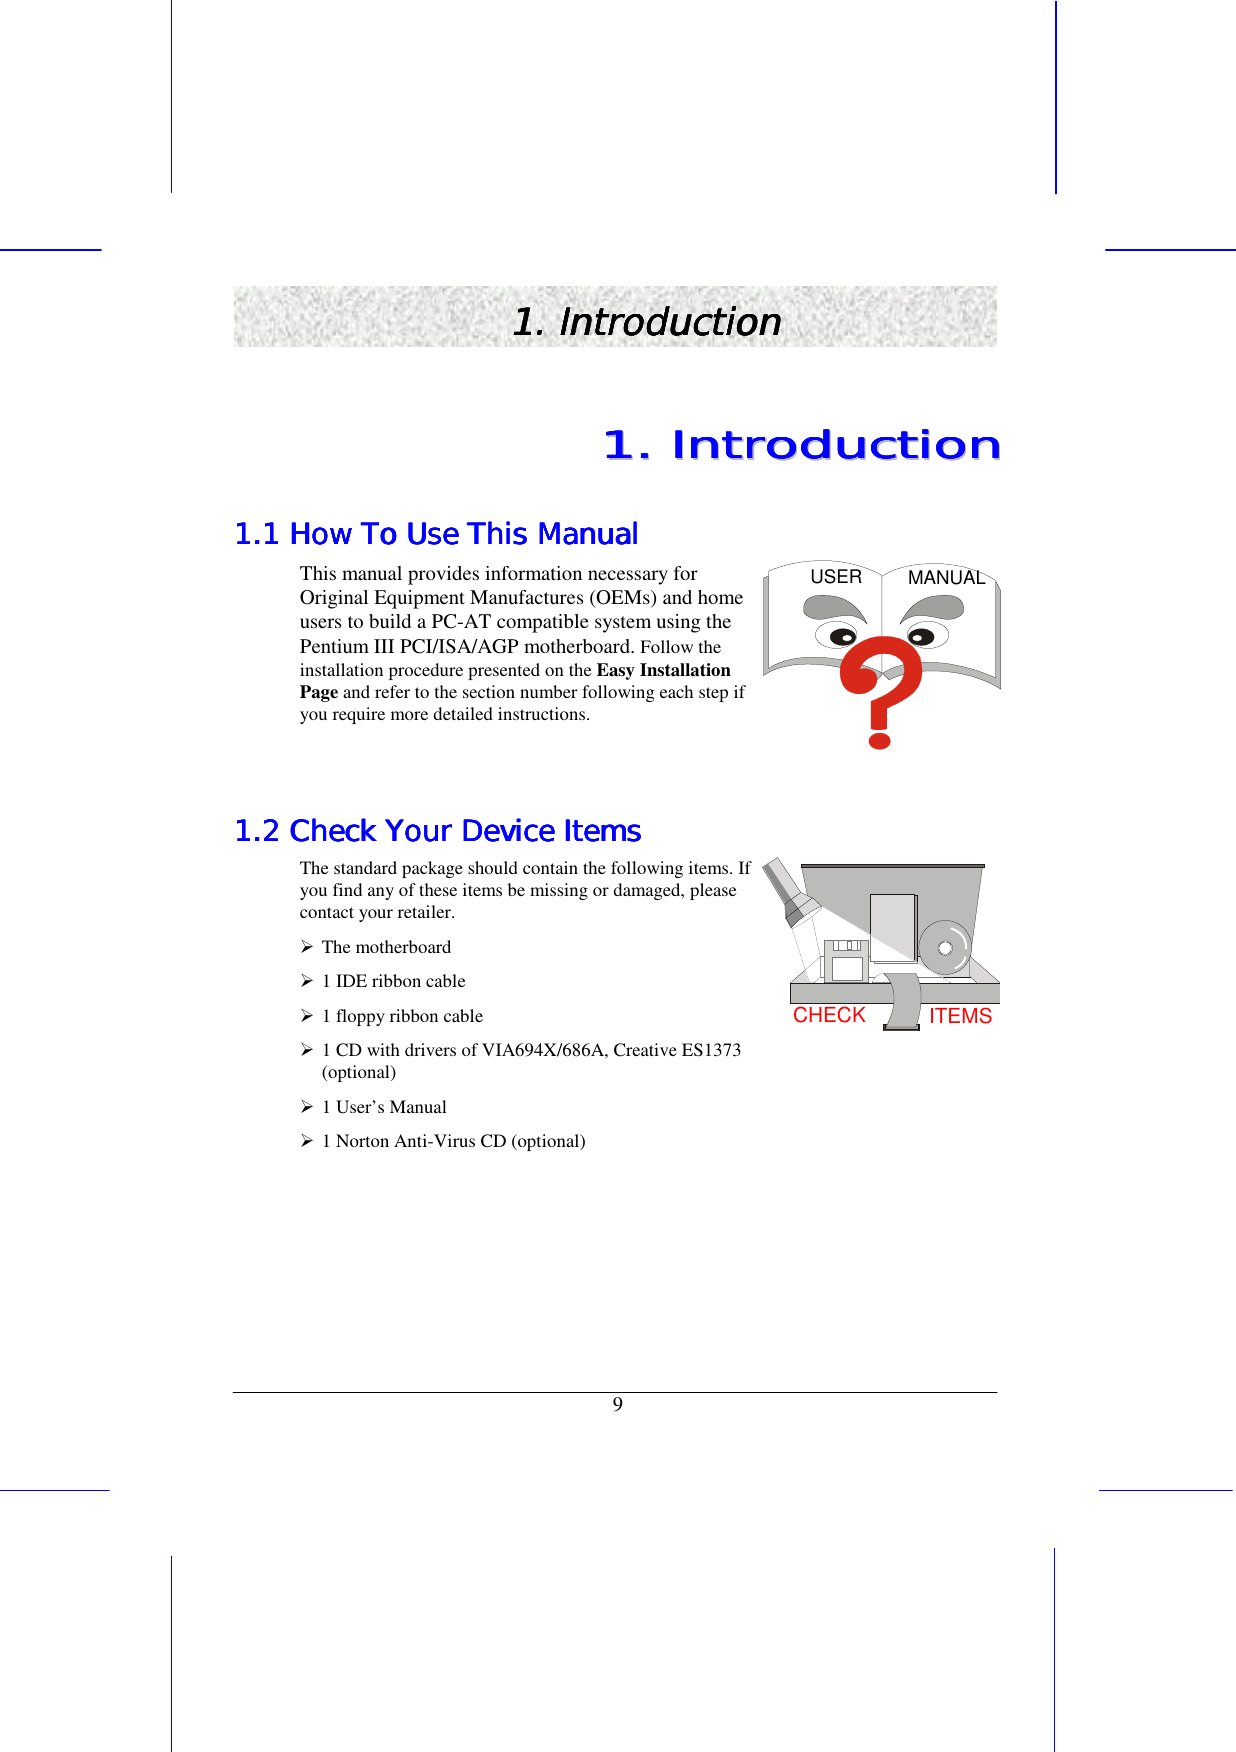   9 1. Introduction1. Introduction1. Introduction1. Introduction    11111111........        IIIIIIIInnnnnnnnttttttttrrrrrrrroooooooodddddddduuuuuuuuccccccccttttttttiiiiiiiioooooooonnnnnnnn        1.1 How To Use This Manual1.1 How To Use This Manual1.1 How To Use This Manual1.1 How To Use This Manual    This manual provides information necessary for Original Equipment Manufactures (OEMs) and home users to build a PC-AT compatible system using the Pentium III PCI/ISA/AGP motherboard. Follow the installation procedure presented on the Easy Installation Page and refer to the section number following each step if you require more detailed instructions. USER MANUAL  1.2 Check Your Device Items1.2 Check Your Device Items1.2 Check Your Device Items1.2 Check Your Device Items    The standard package should contain the following items. If you find any of these items be missing or damaged, please contact your retailer. !&quot;The motherboard !&quot;1 IDE ribbon cable !&quot;1 floppy ribbon cable !&quot;1 CD with drivers of VIA694X/686A, Creative ES1373 (optional)   !&quot;1 User’s Manual !&quot;1 Norton Anti-Virus CD (optional) CHECK ITEMS    